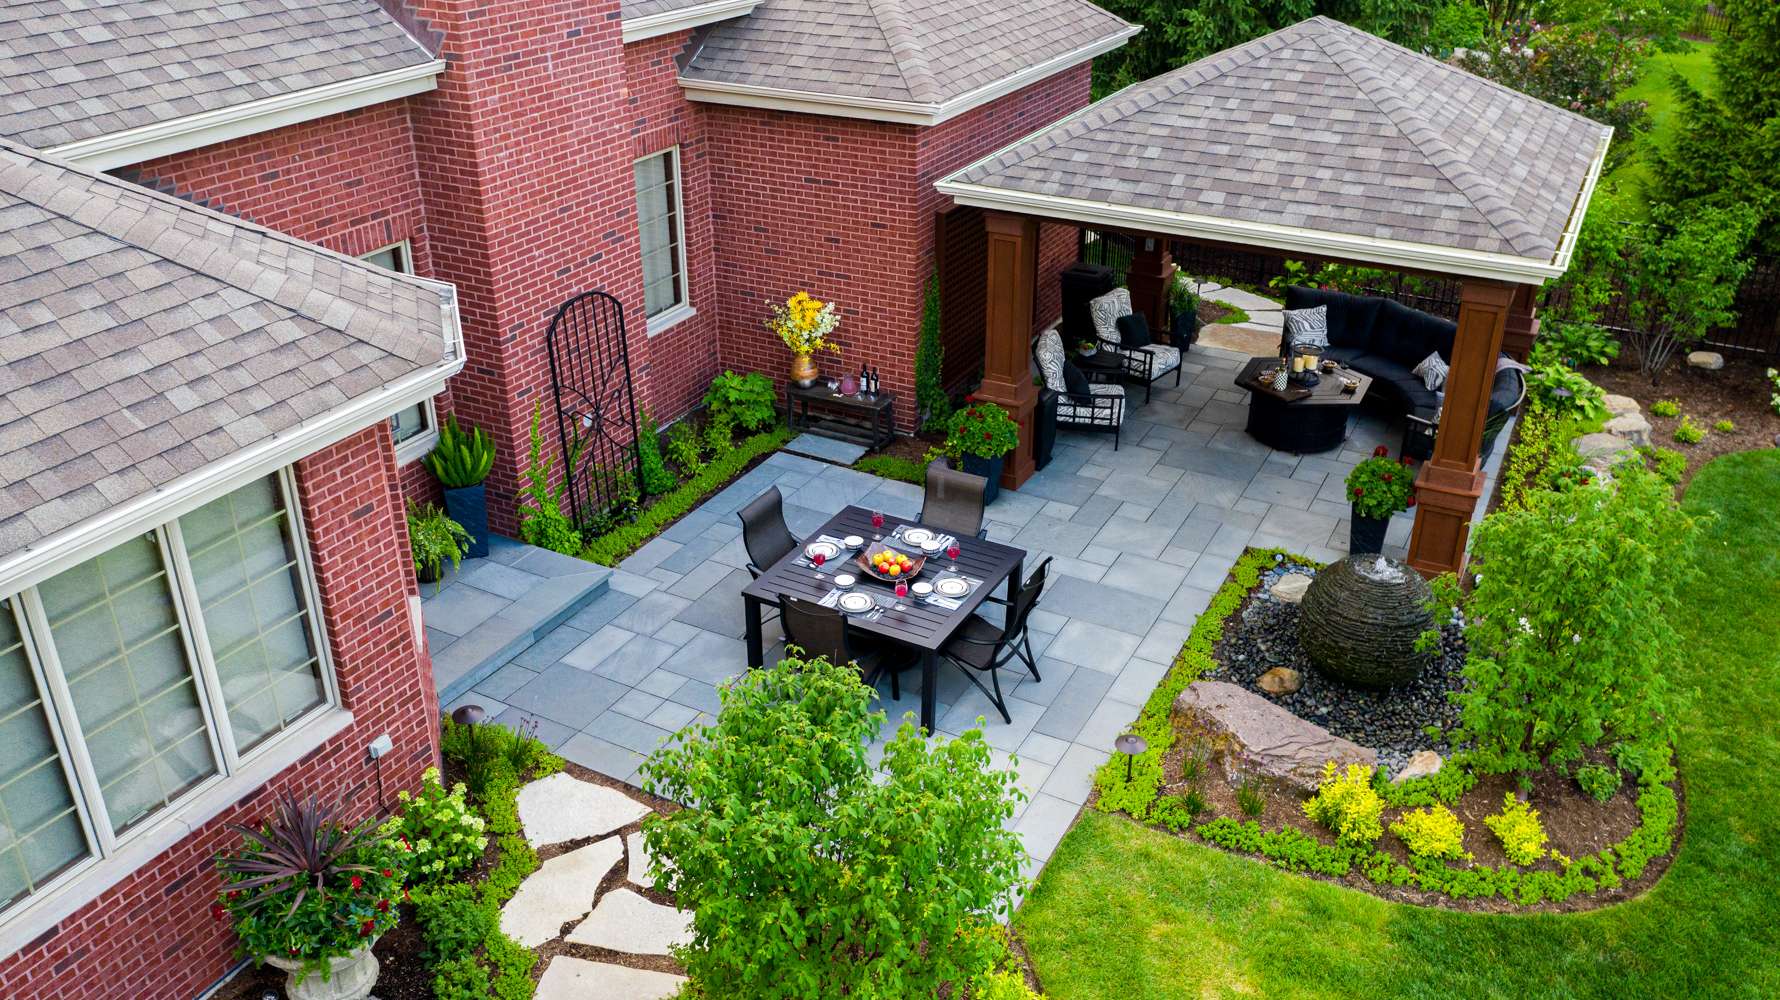 aerial-pergola-patio-paver-seatin-water feature-planting-plants-lawn-natural stone-trellis-container